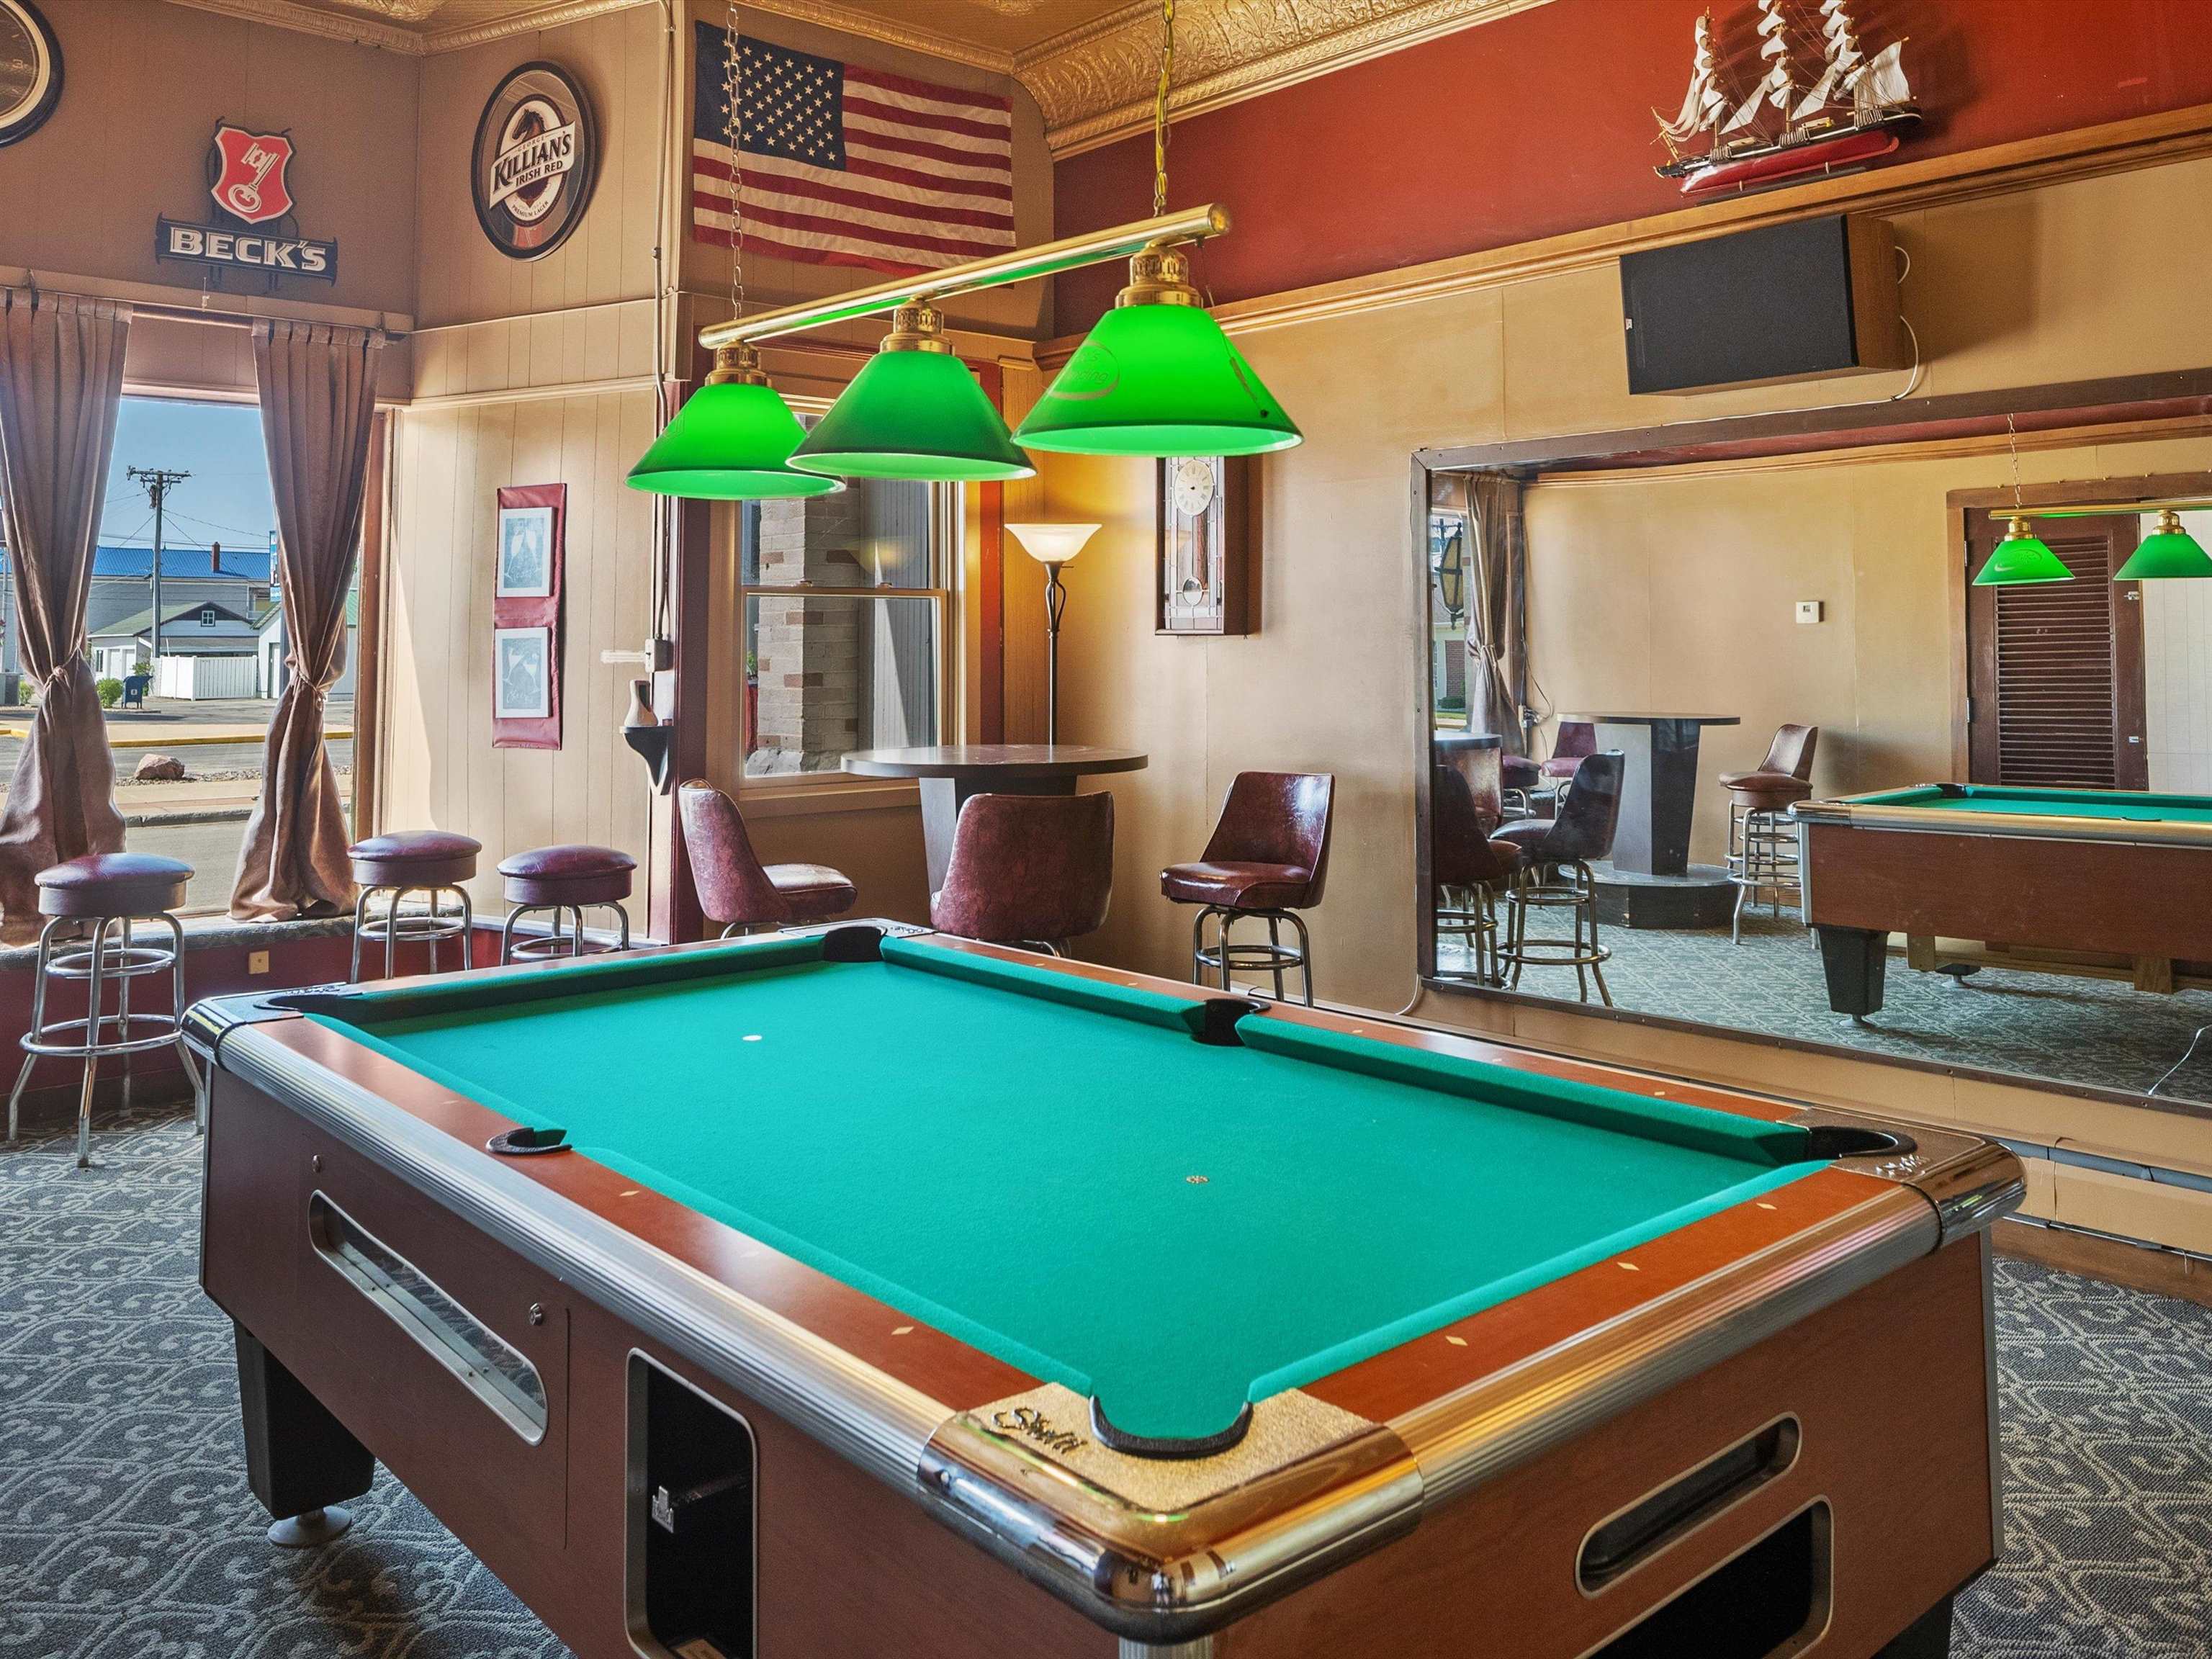 Table top for pool table allows hosting hors 'd oeuvre parties for private functions